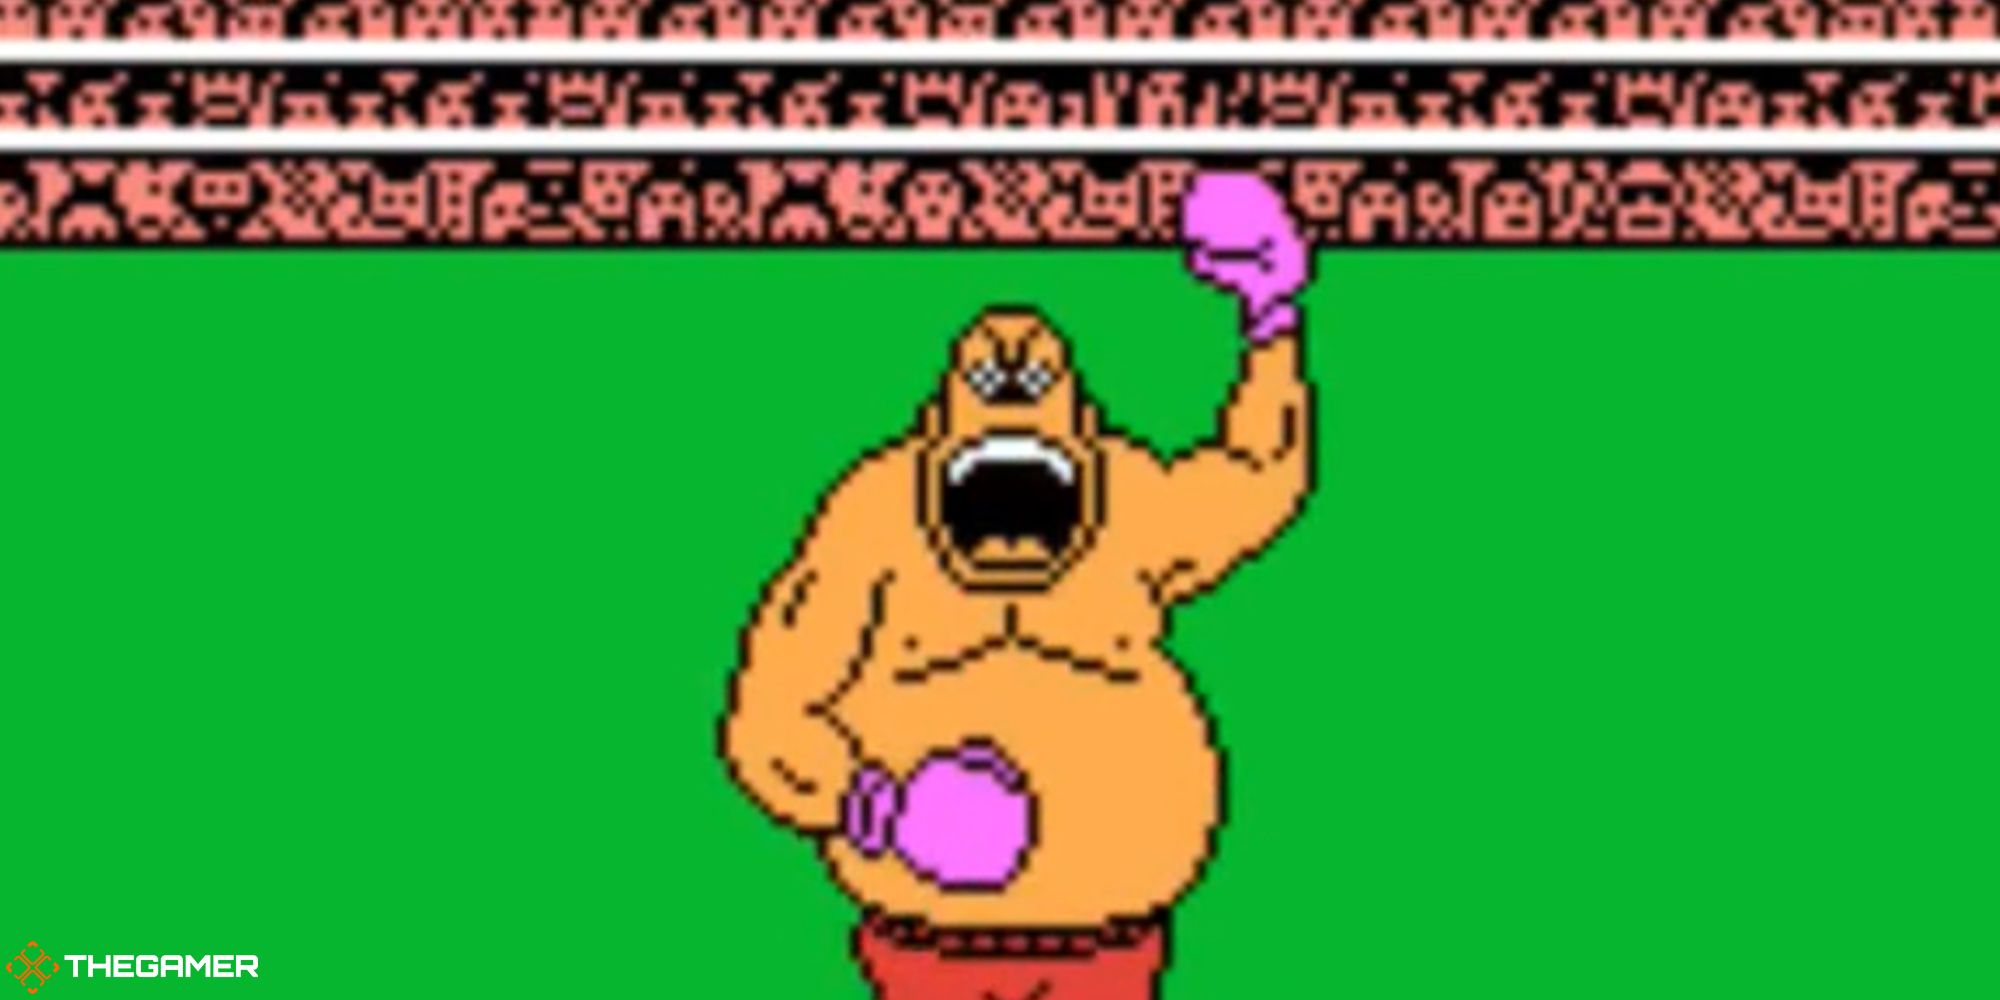 Nintendo's Punch-Out!! - King Hippo